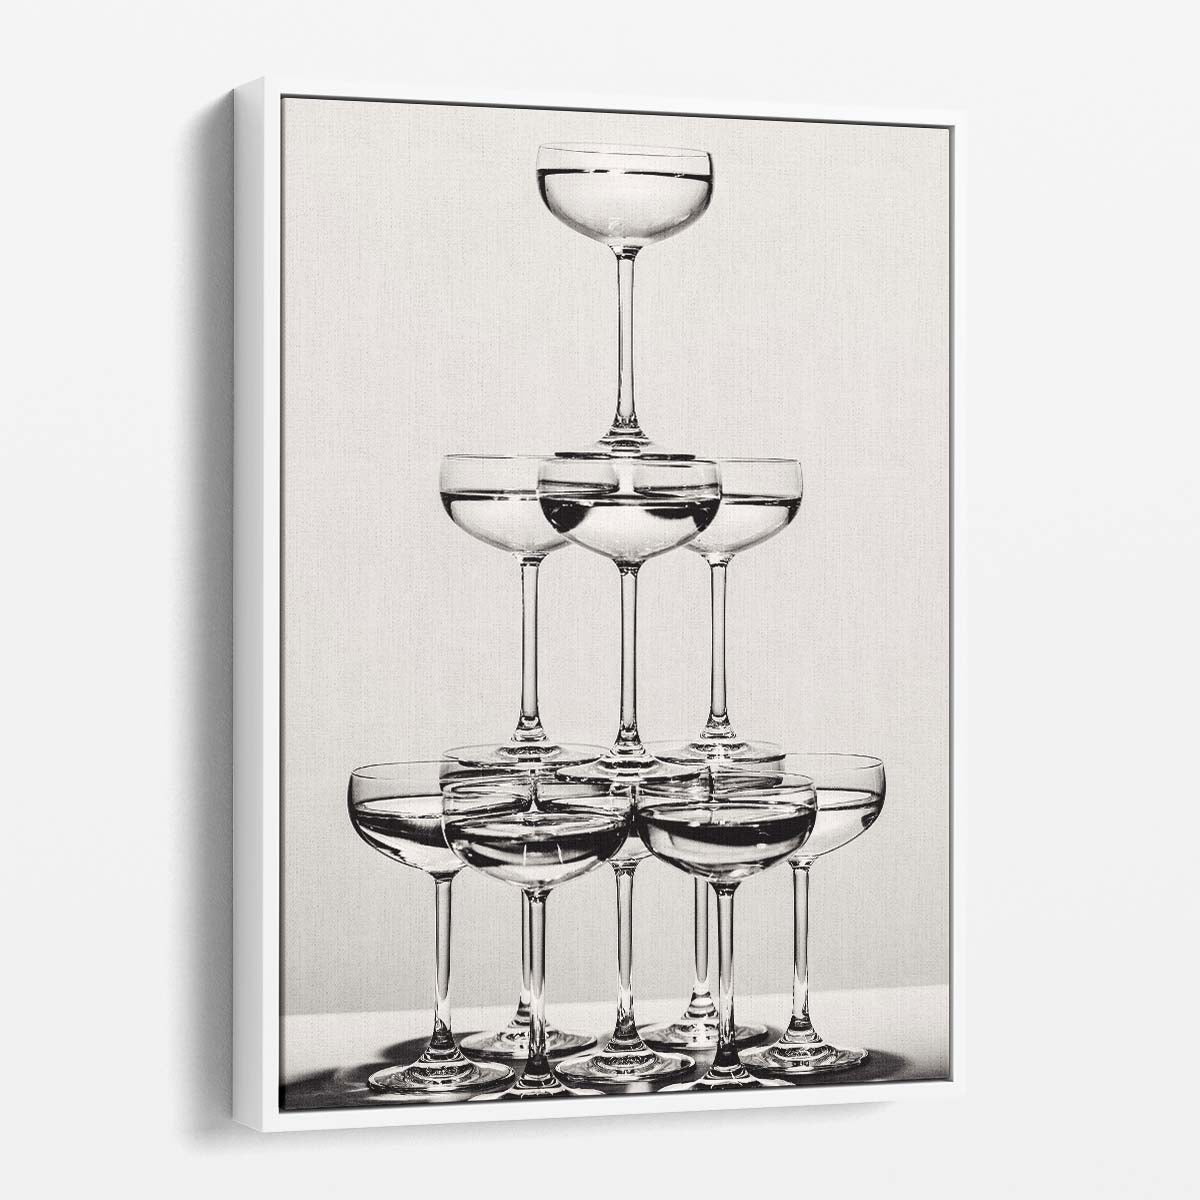 Monochrome Still Life Champagne Tower Photography for Bar Decor by Luxuriance Designs, made in USA